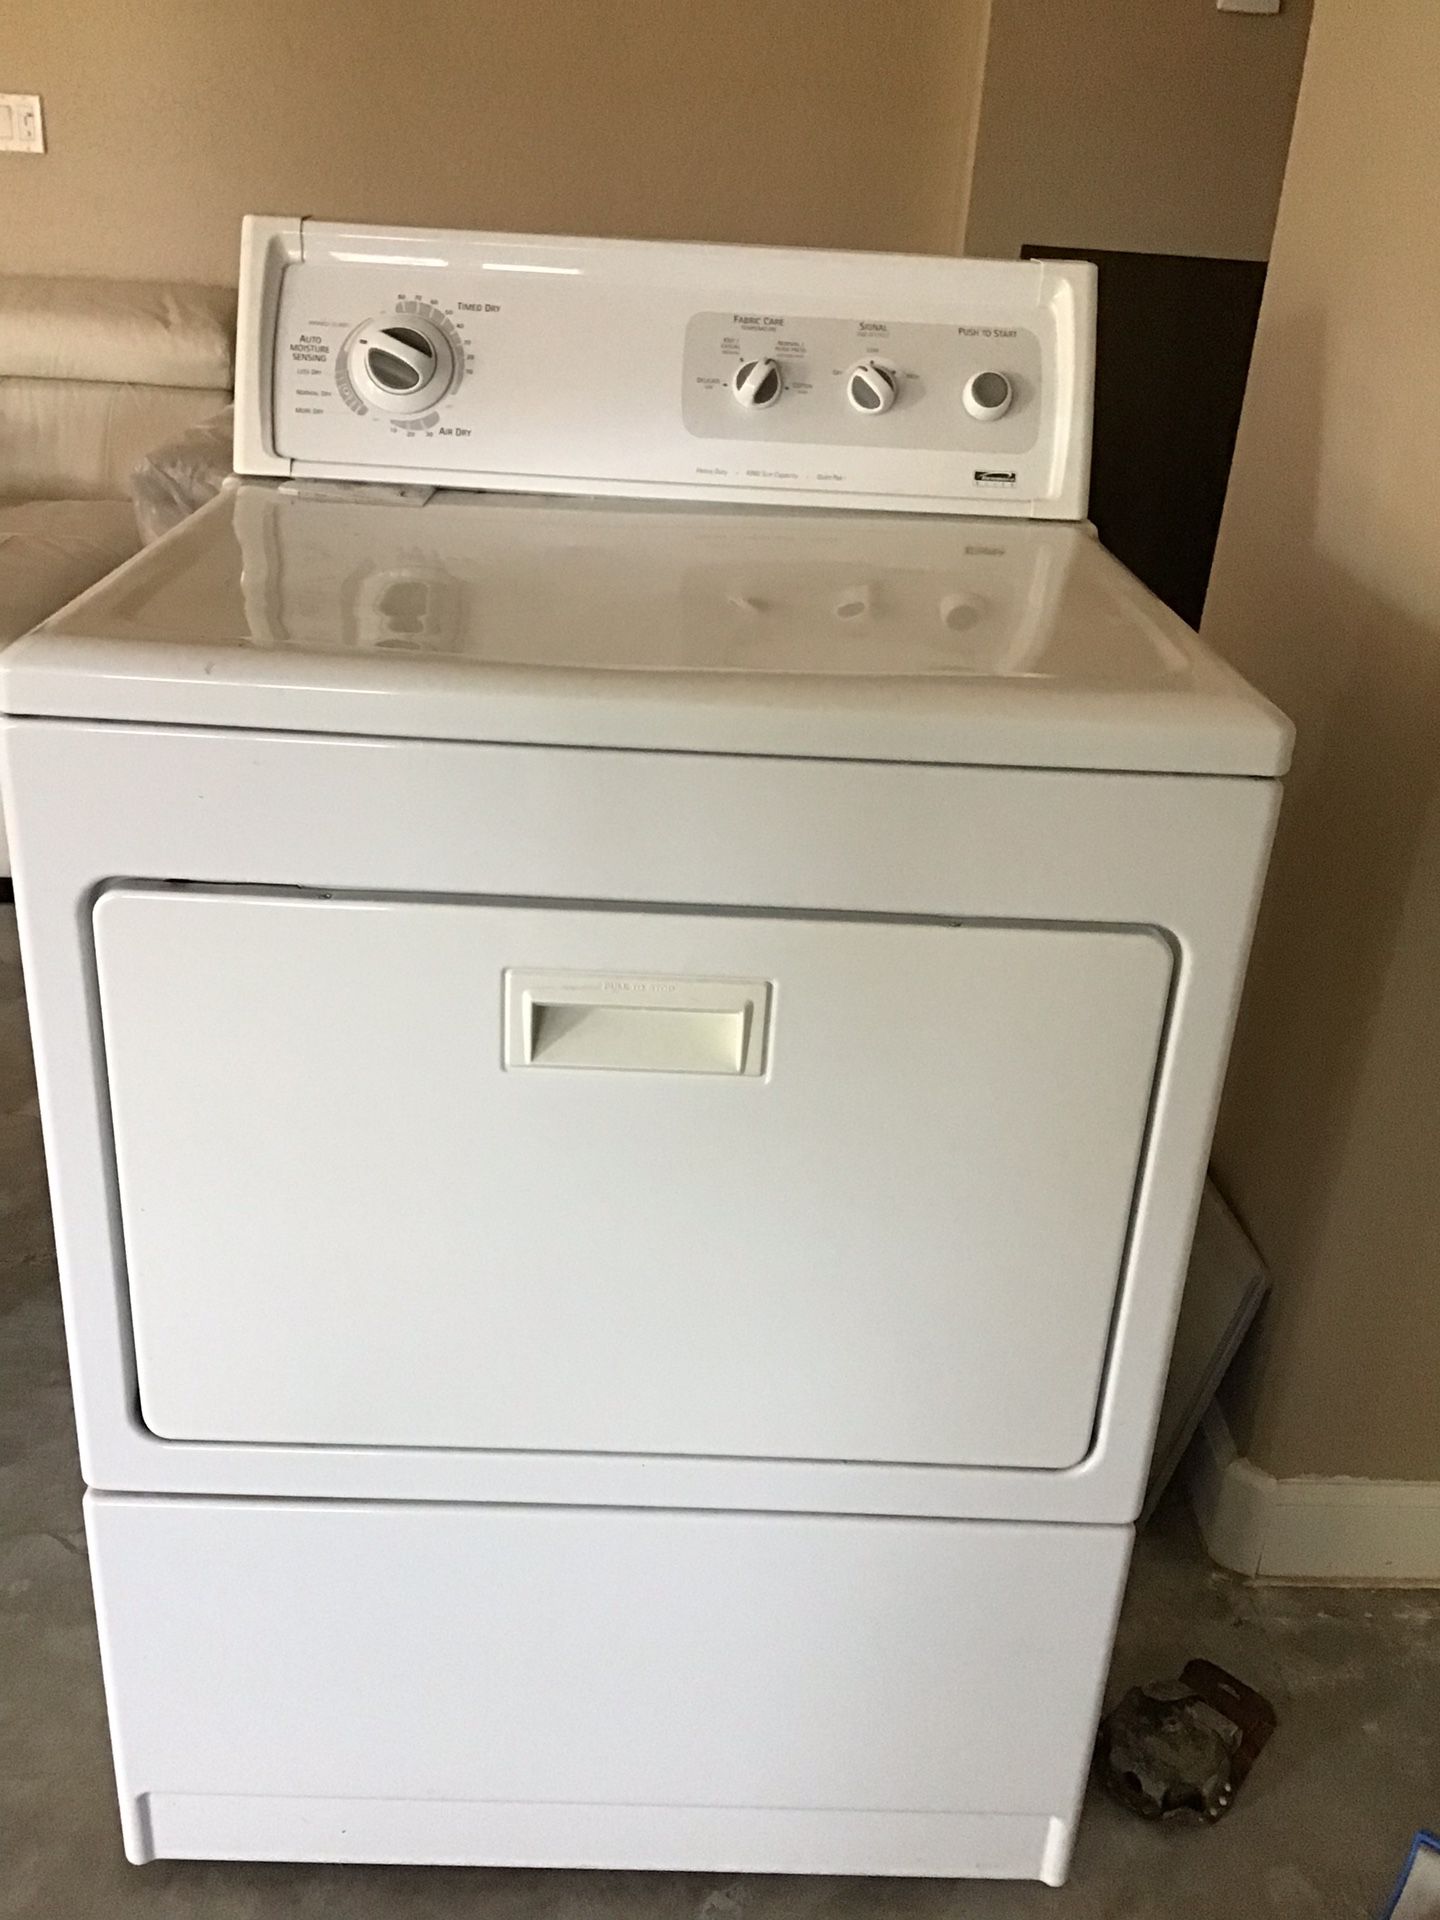 Kenmore Elite washer and dryer set $400 OBO